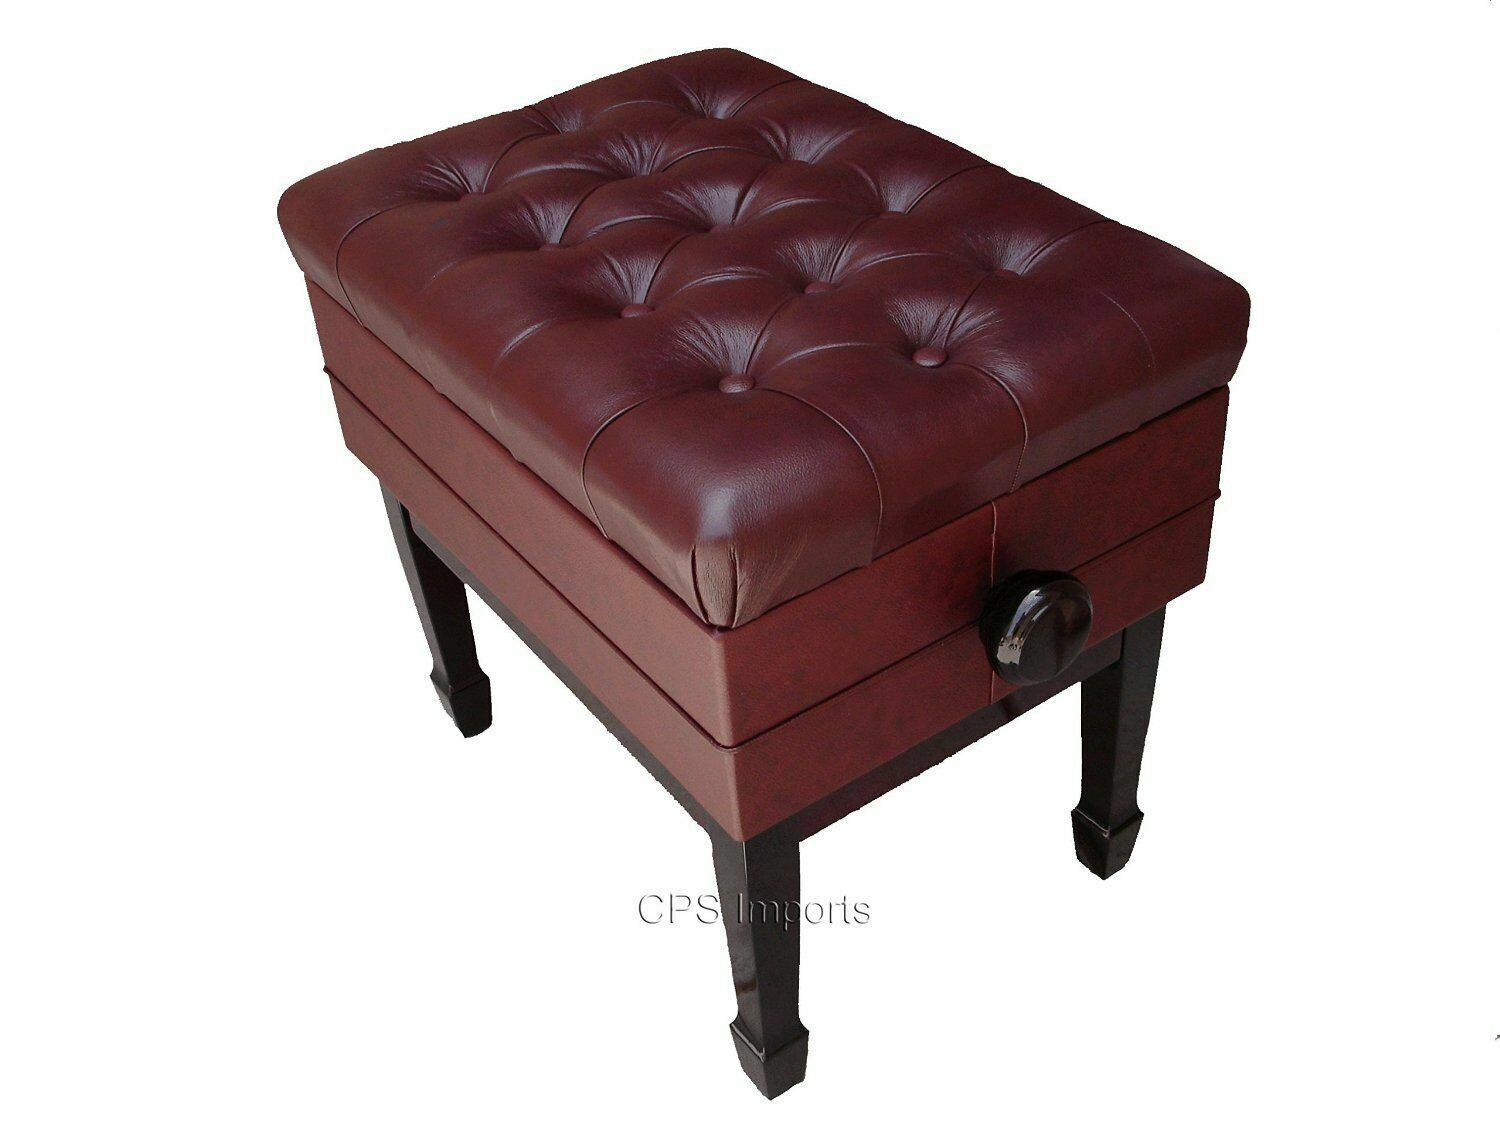 Los Angeles Mall GENUINE LEATHER Sales of SALE items from new works ADJUSTABLE ARTIST PIANO MAHOG CHAIR- STOOL BENCH